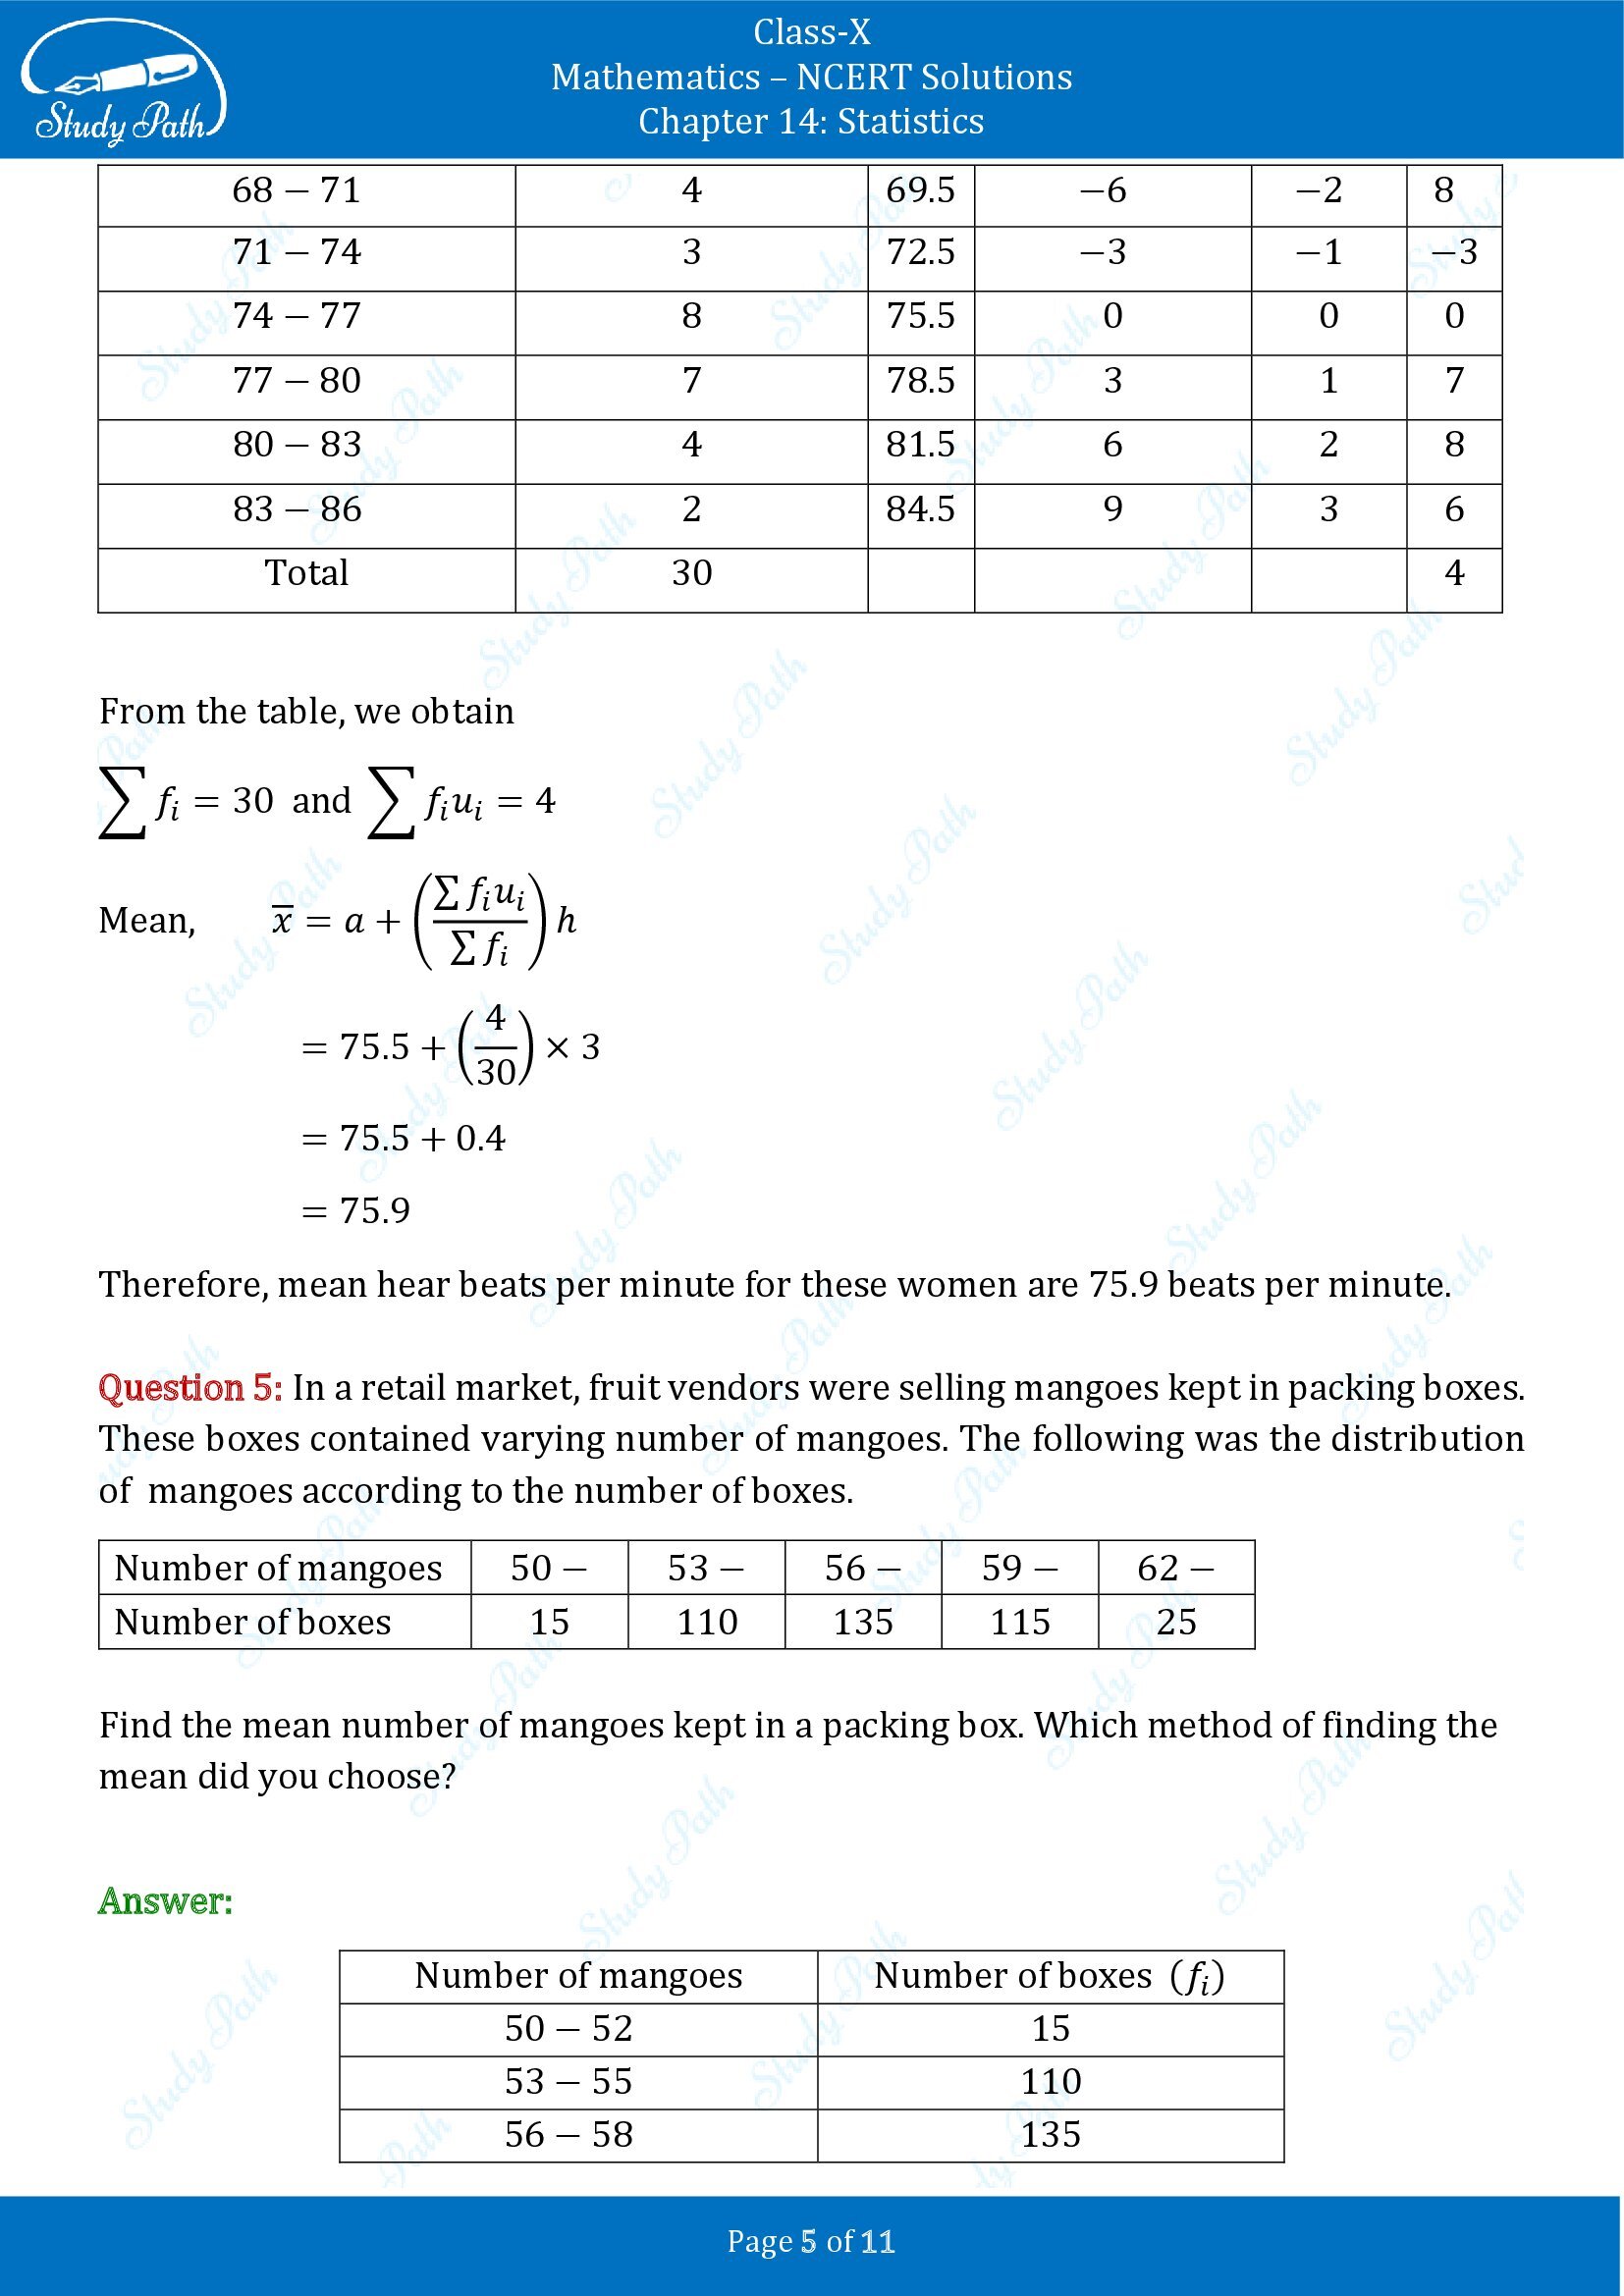 NCERT Solutions for Class 10 Maths Chapter 14 Statistics Exercise 14.1 00005